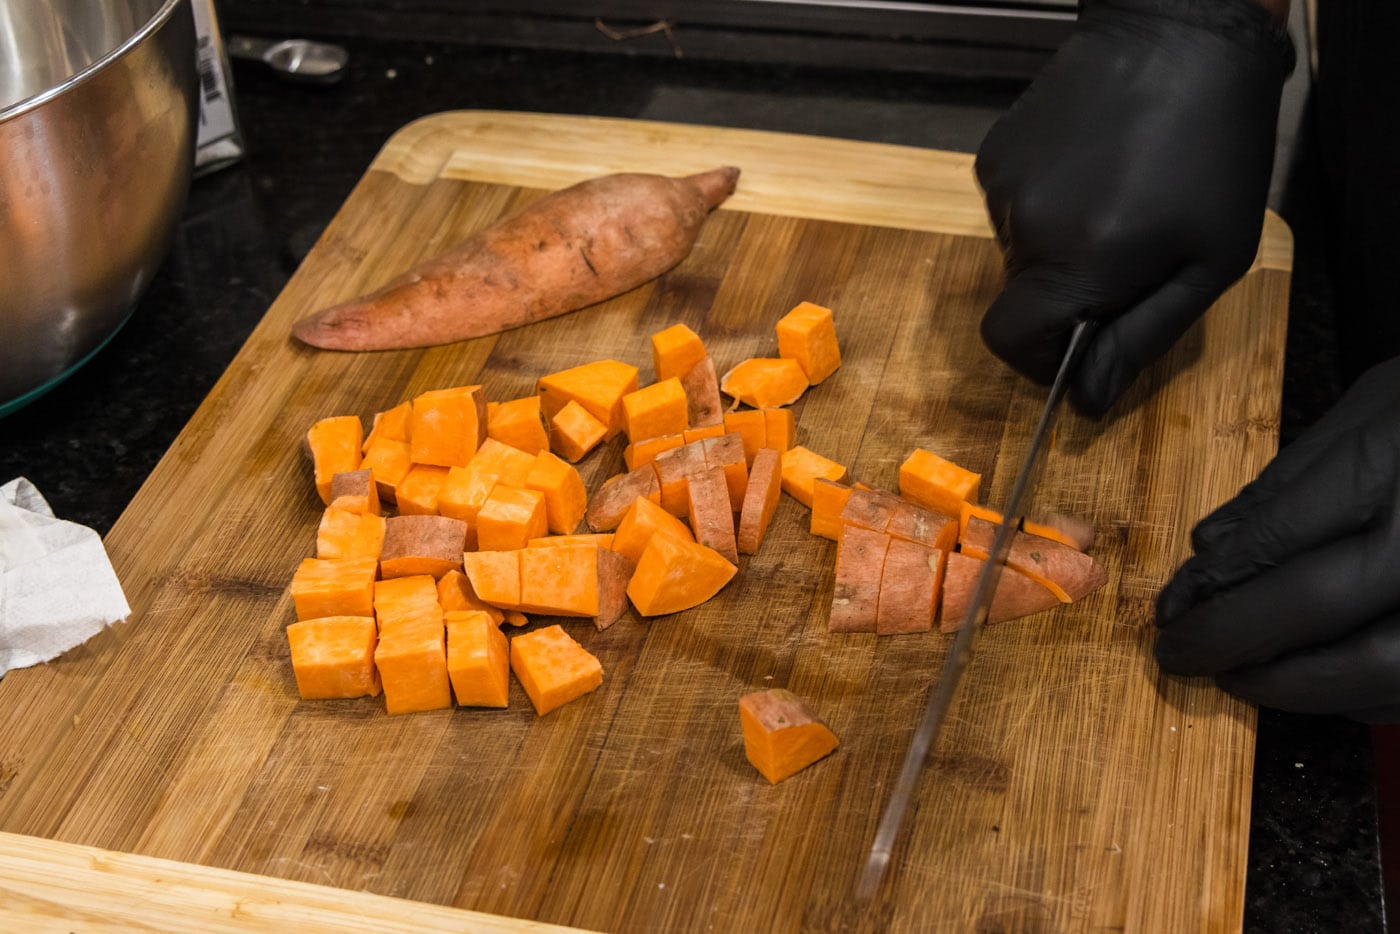 dicing sweet potatoes with a knife on a cutting board